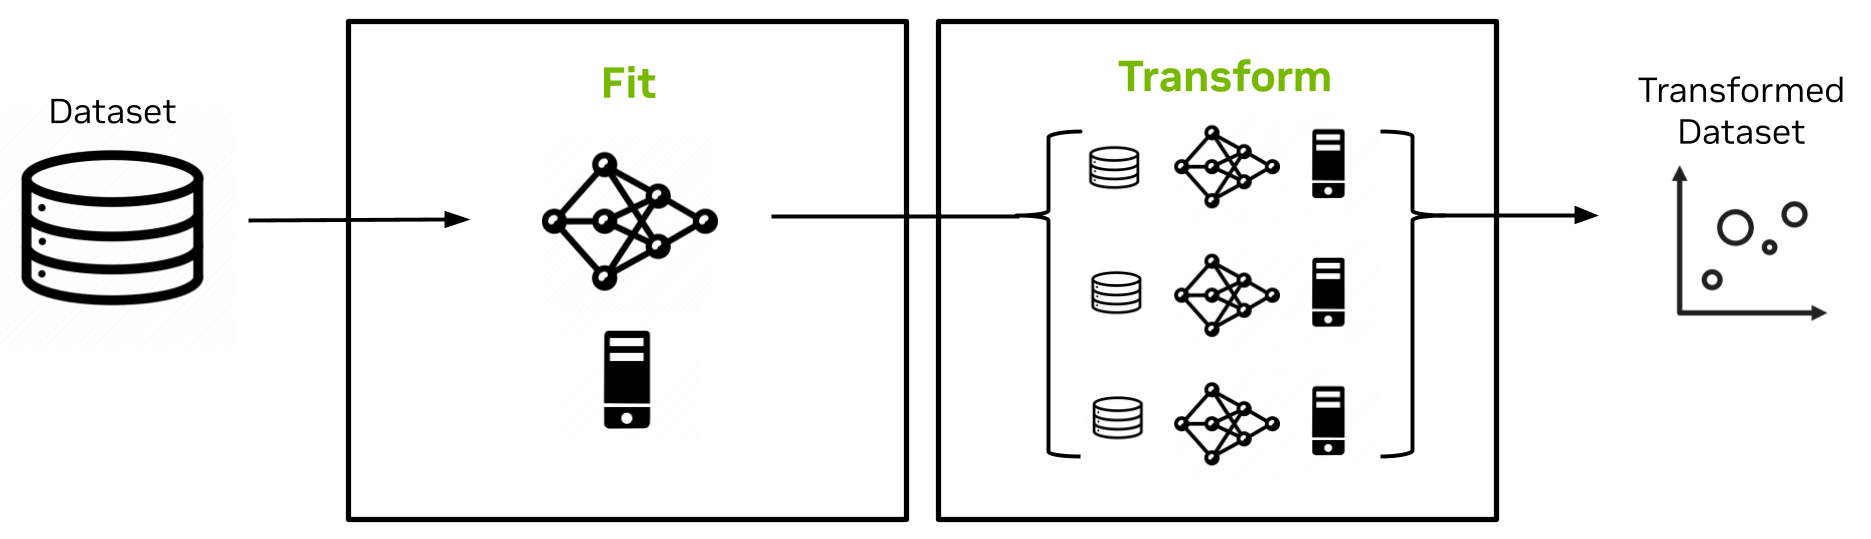 In a left-to-right flow, a random sample of a dataset is read from persistent storage by a worker running on a single server and GPU to carry out the Fit or training step. The trained model is broadcast to a collection of workers running on multiple servers and GPUs for the Transform step operating on the full distributed dataset. The UMAP embeddings computed by each worker in the Transform step are then available for storage or other downstream tasks.